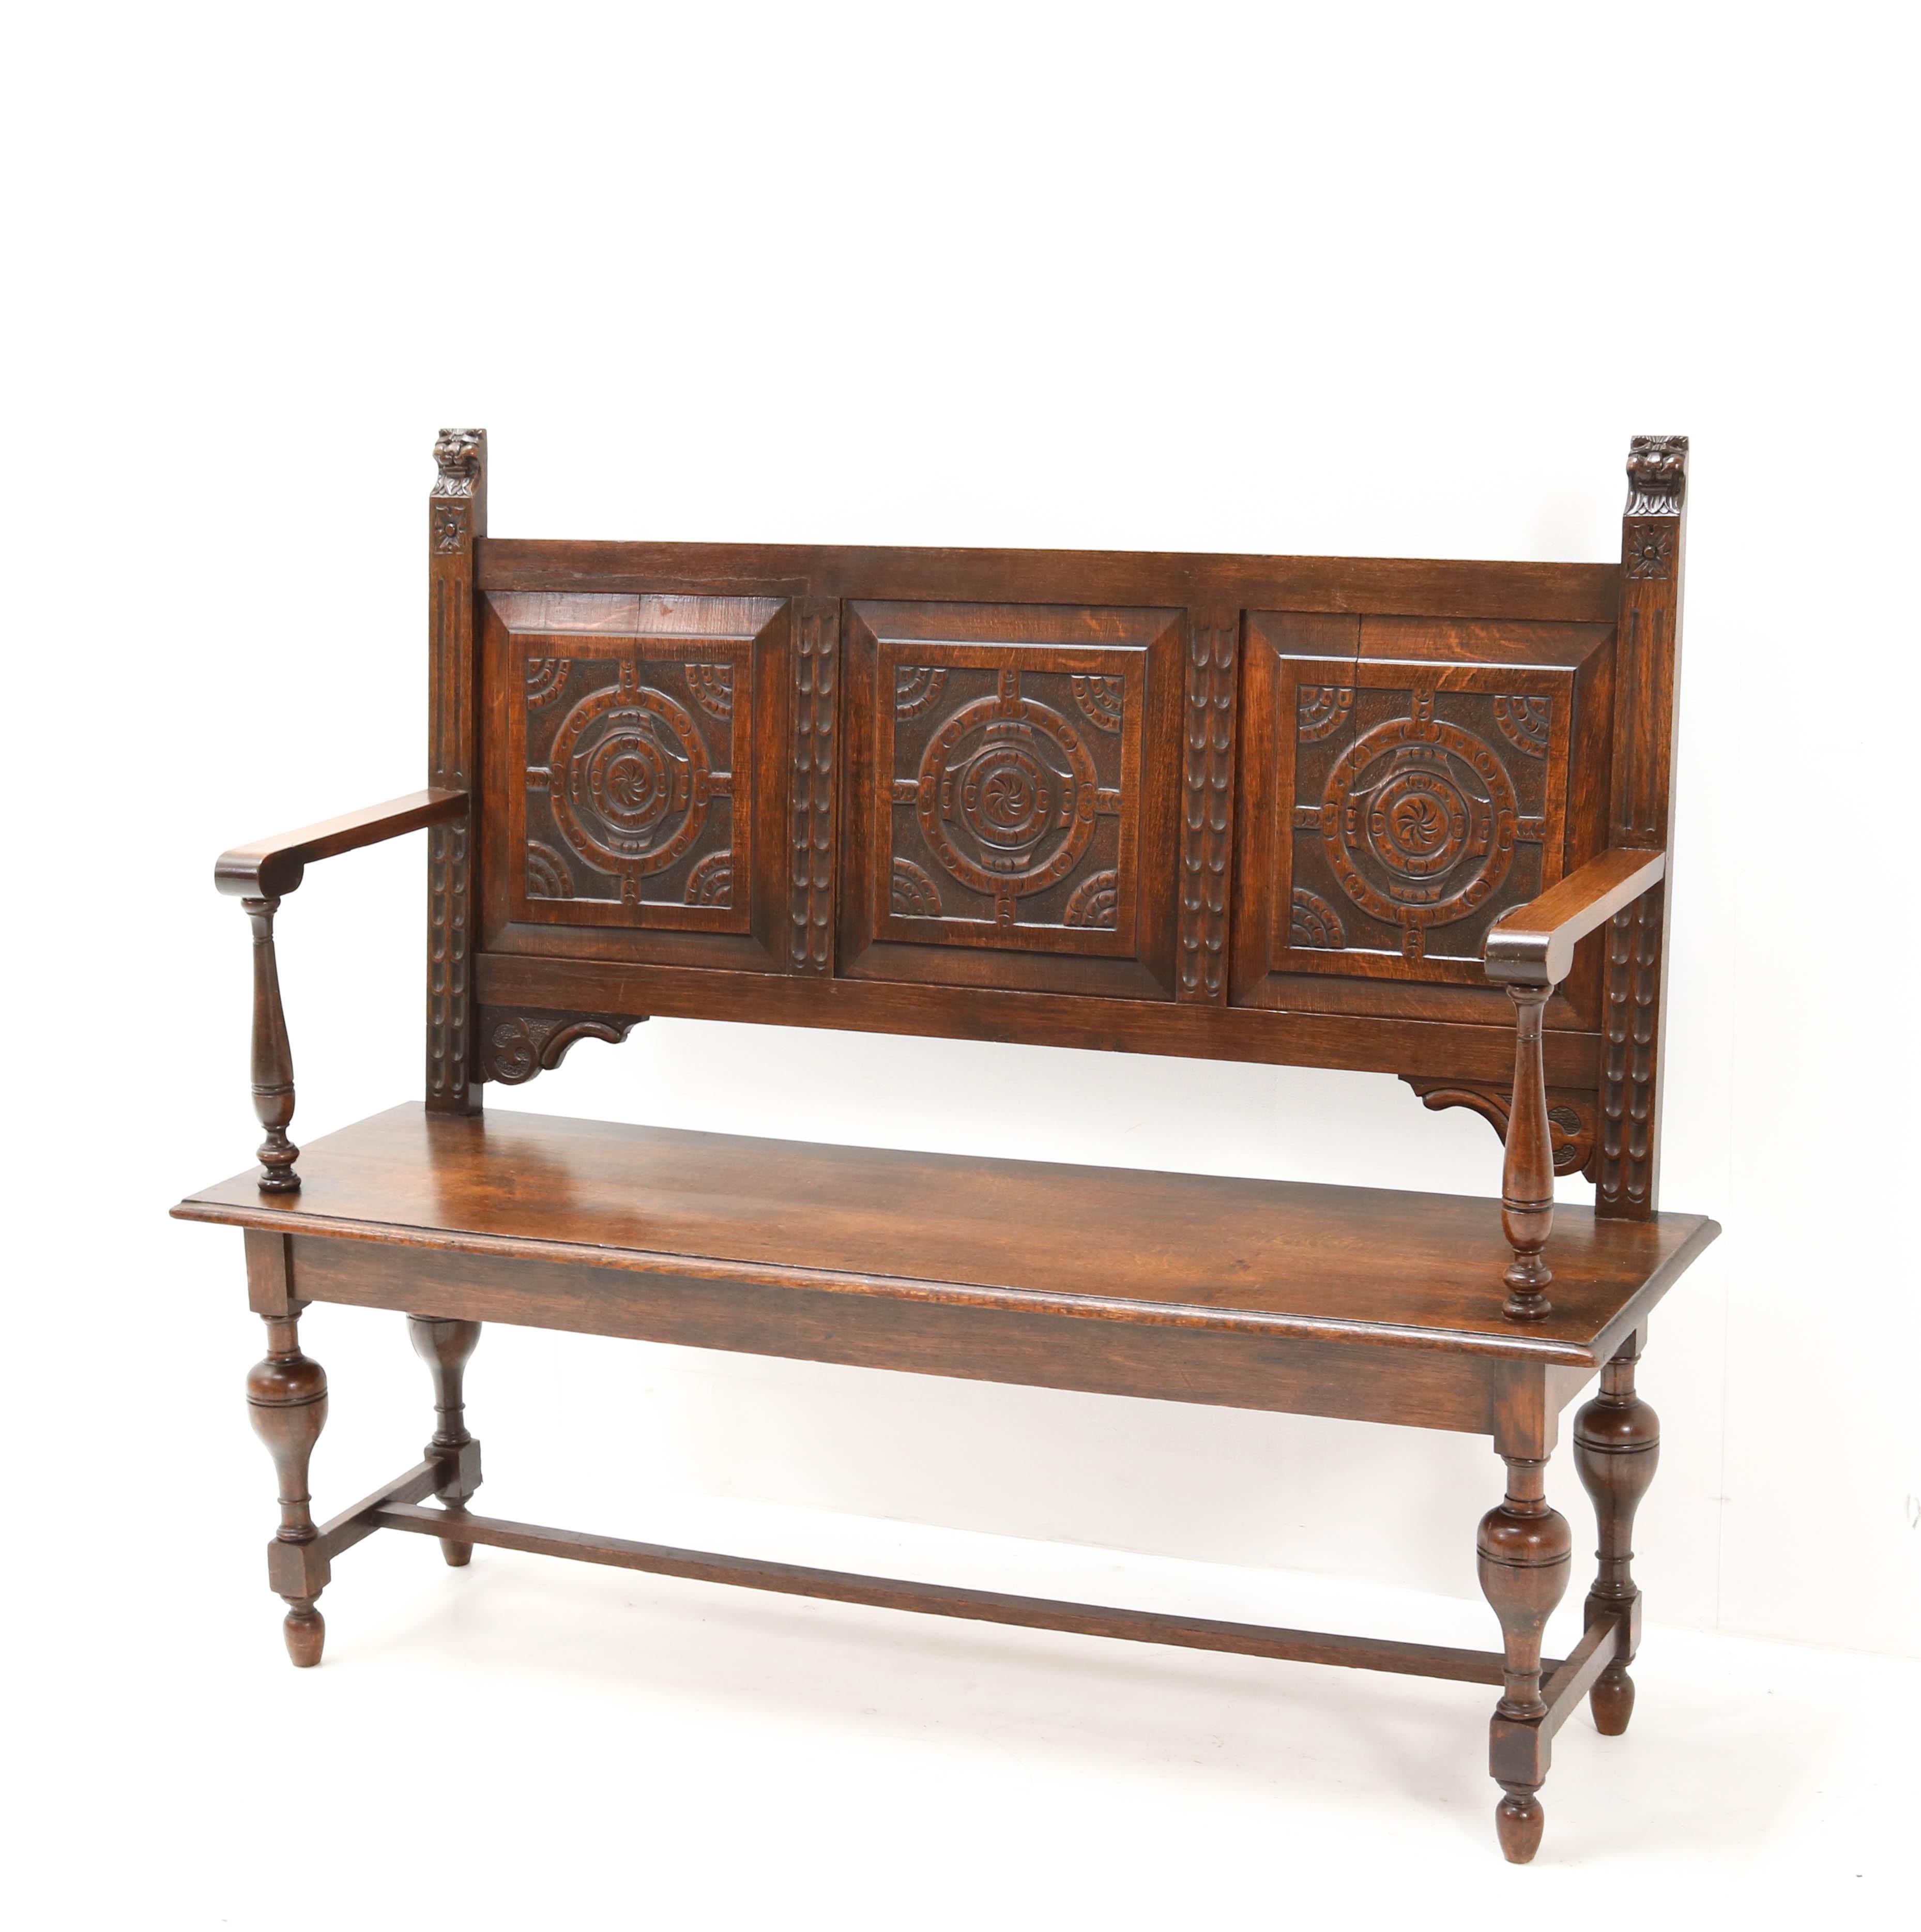 Wonderful Renaissance style hall bench.
Striking Dutch design from the late 19th century.
Solid oak with carved lion heads and carved panels.
In very good condition with a beautiful patina.